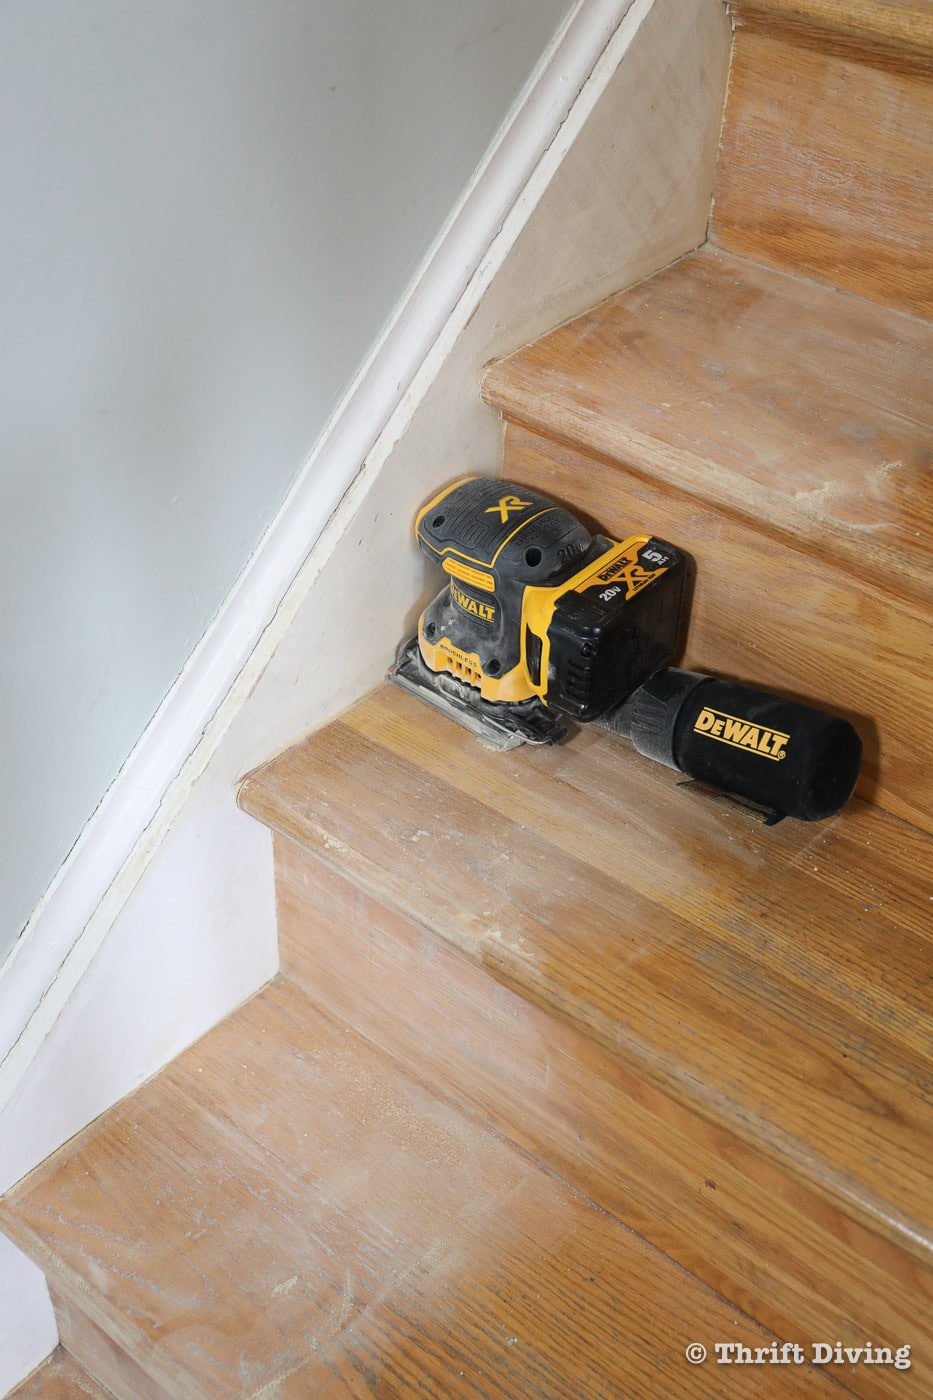 How to Install a Stair Runner - Use a sheet sander with 150-grit sandpaper to sand your stairs before priming and painting them. - Thrift Diving